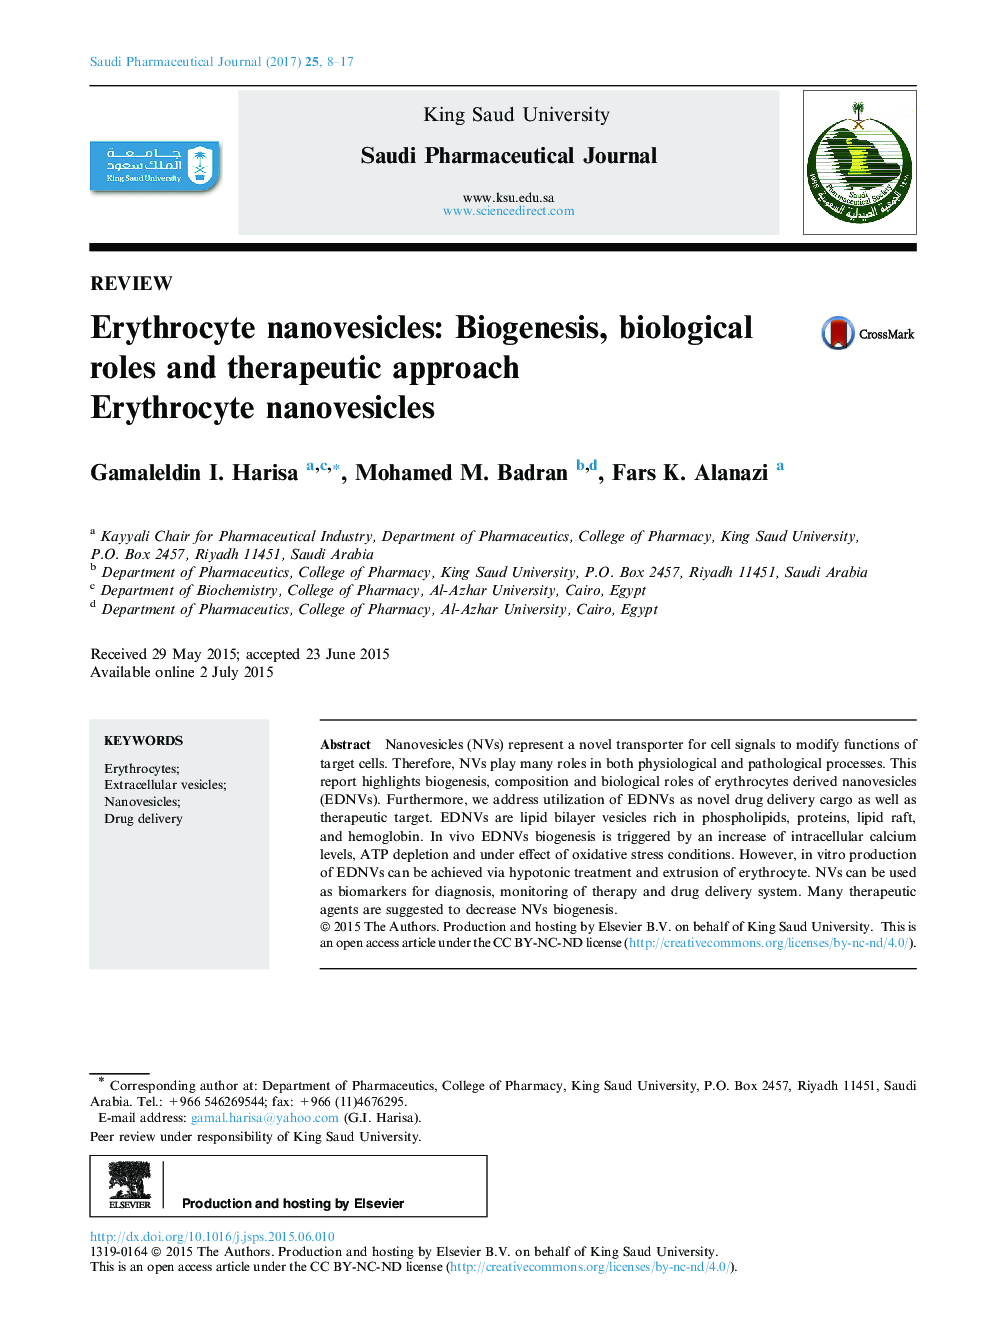 Erythrocyte nanovesicles: Biogenesis, biological roles and therapeutic approach: Erythrocyte nanovesicles